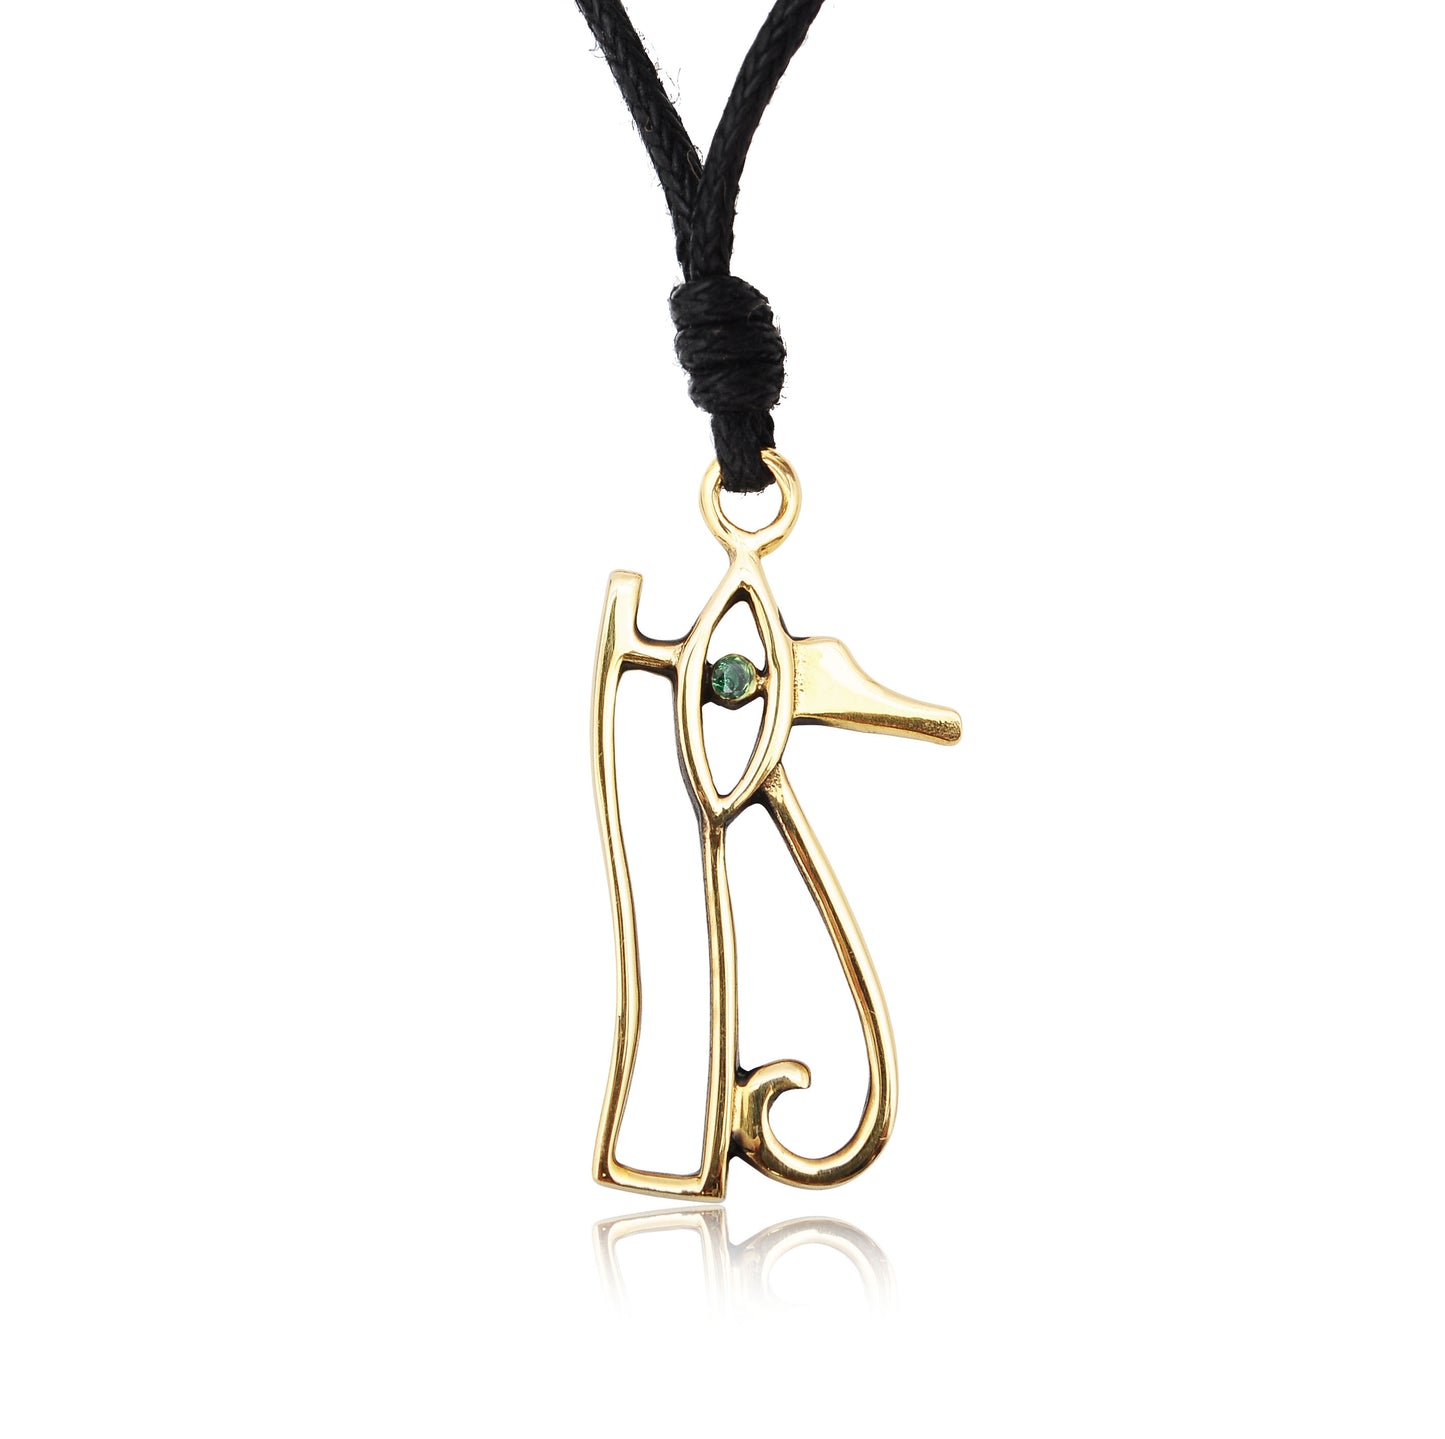 Eye of Ra Horus Egyptian Silver Pewter Charm Necklace Pendant Jewelry